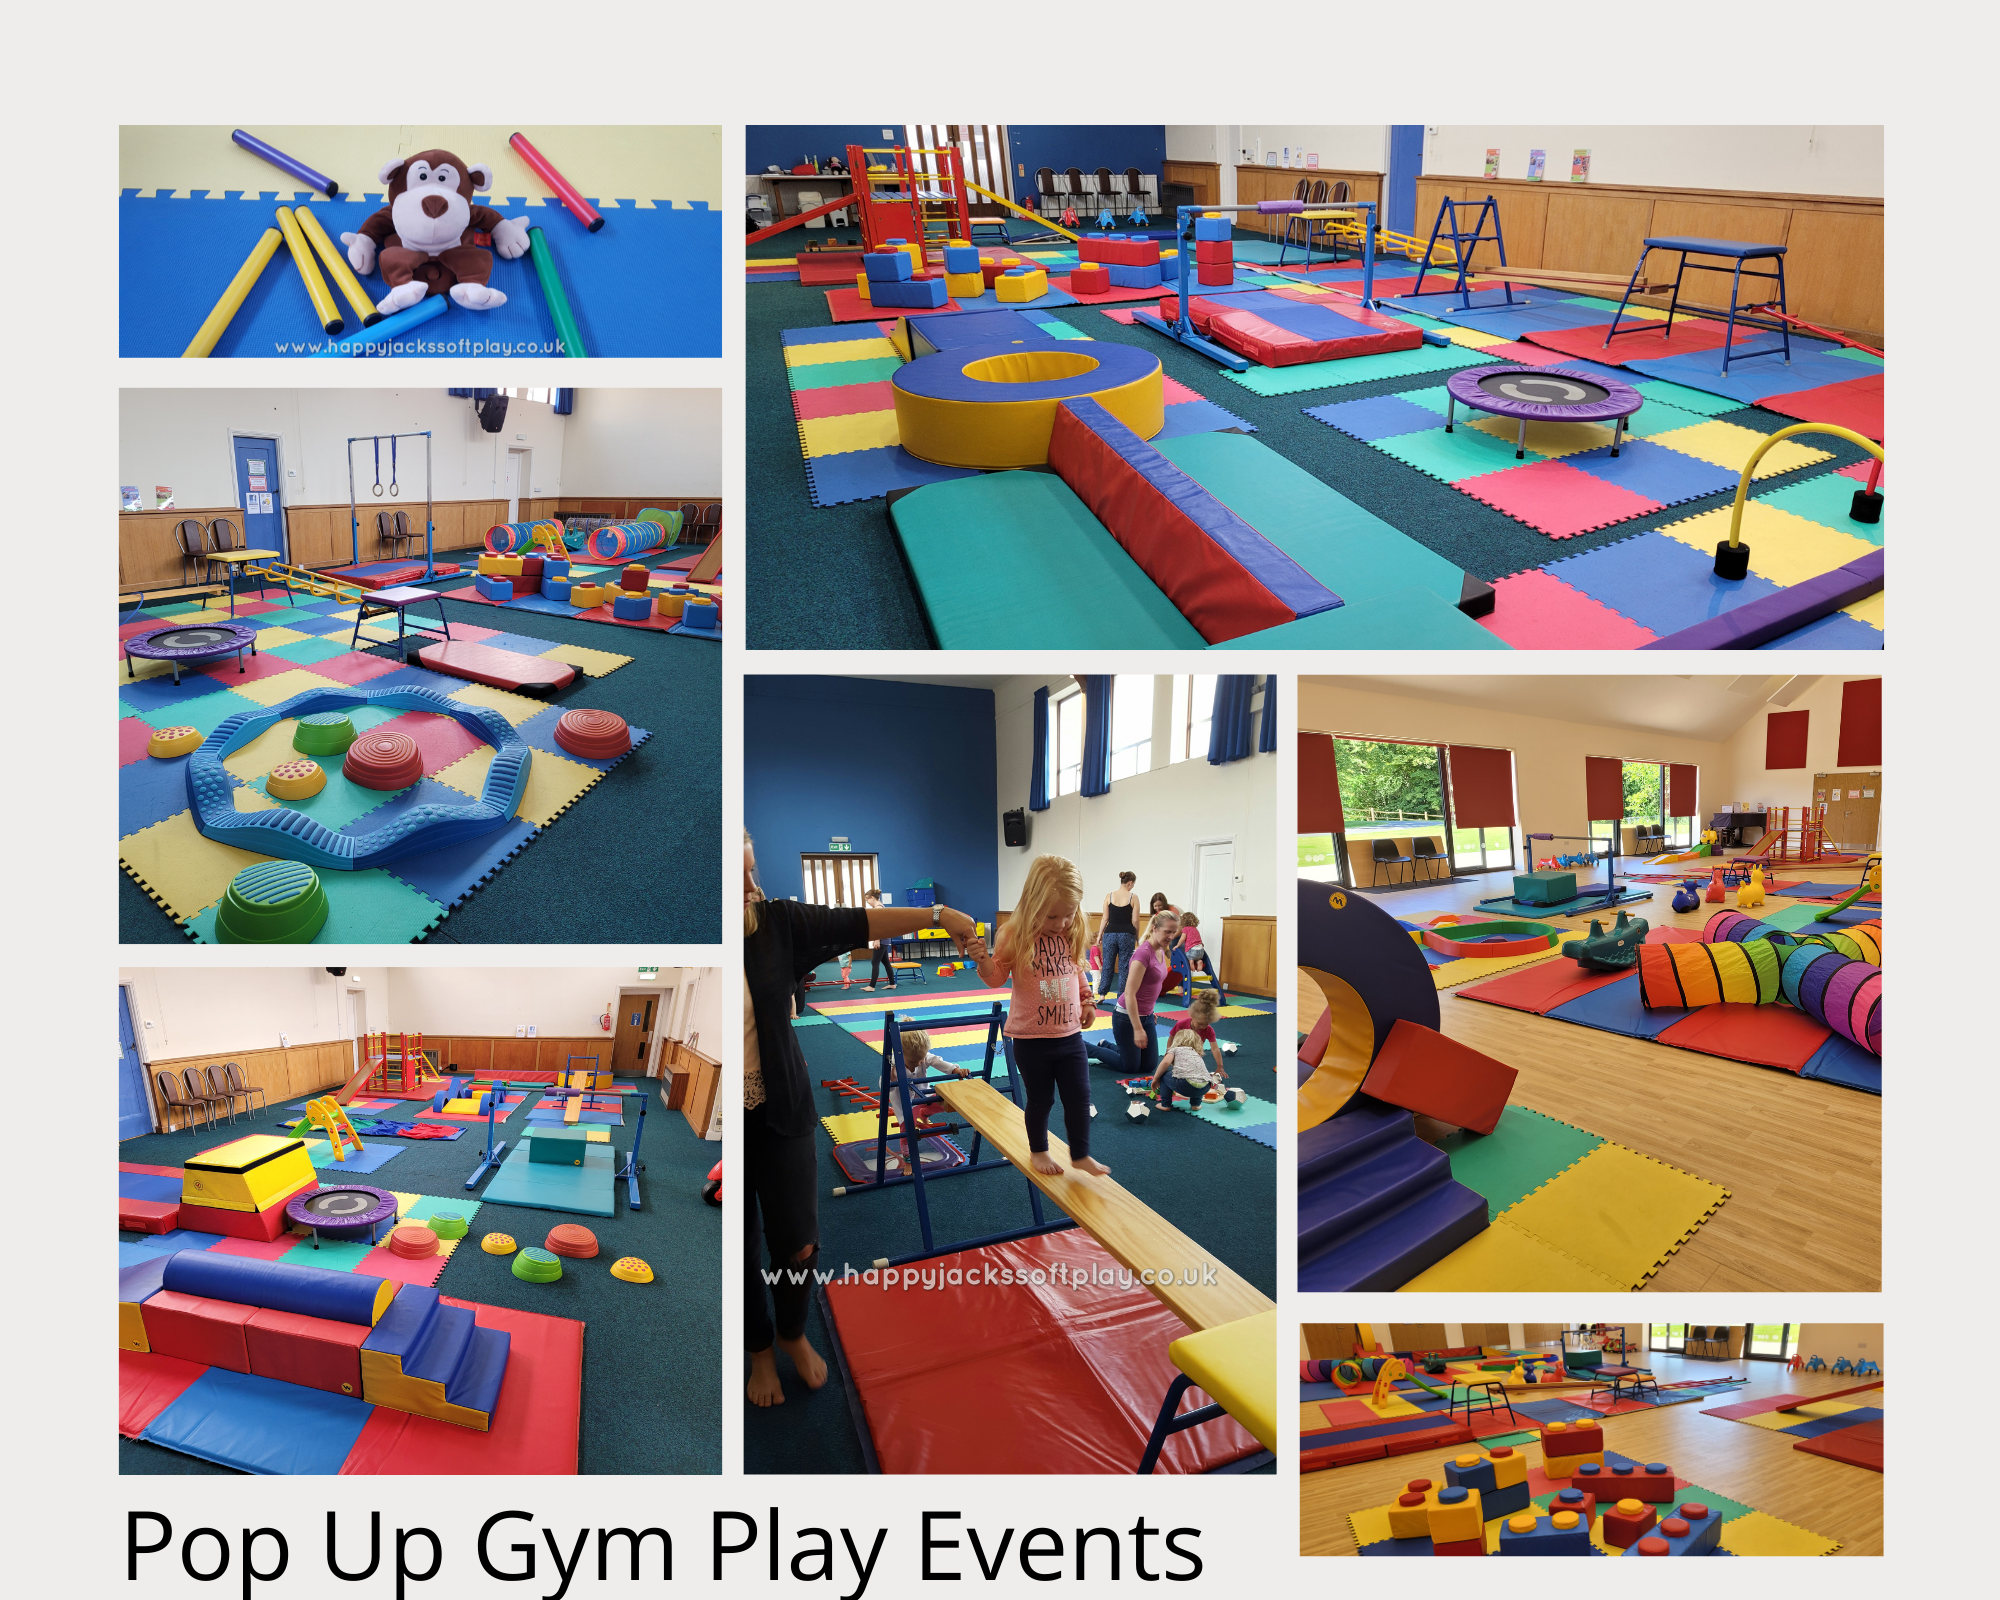 Pop Up Gym Play Sessions